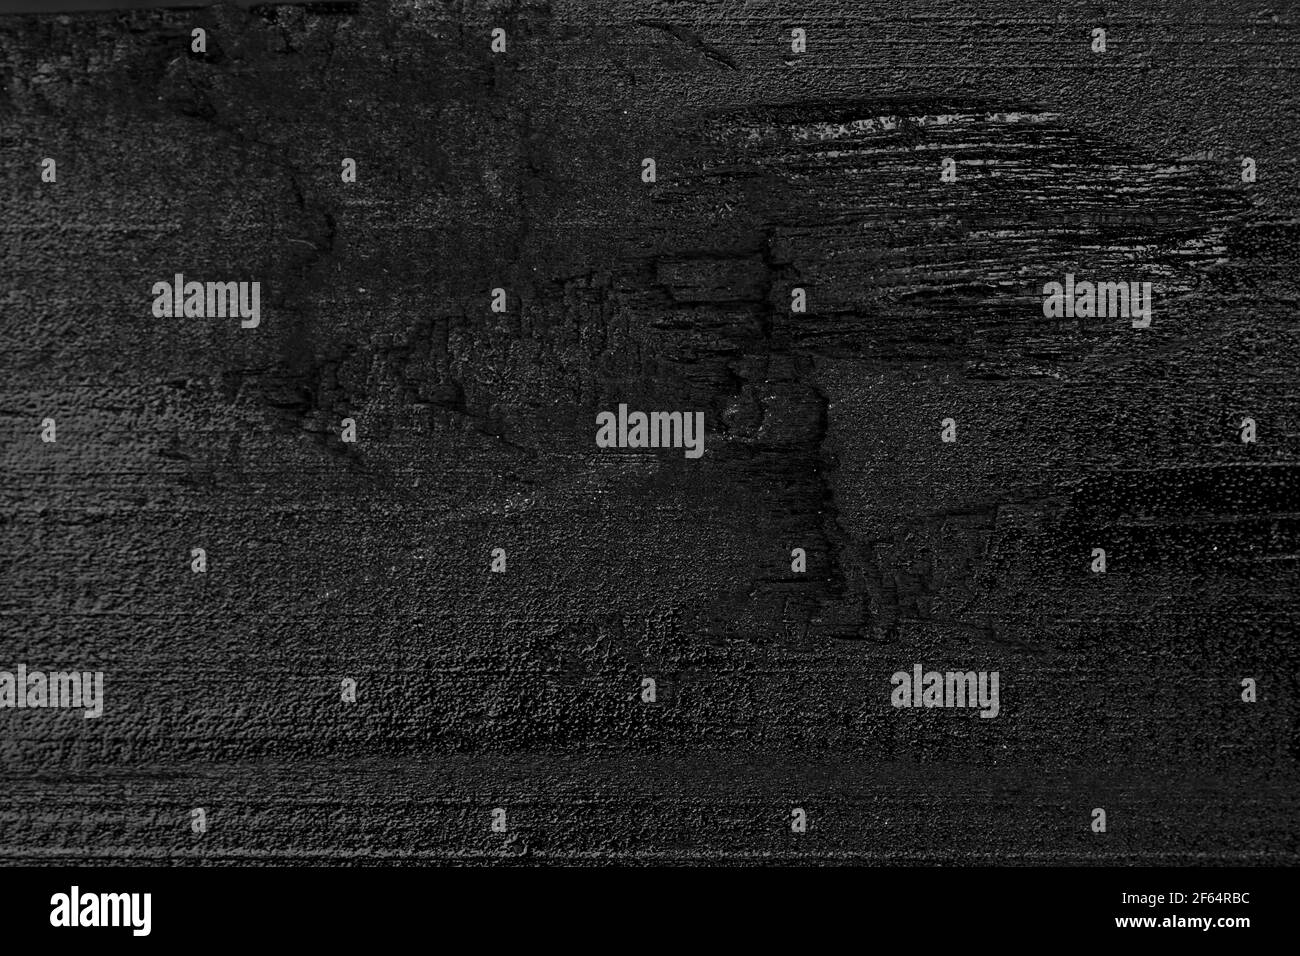 Amazing material of Black wood texture background Blank with fantastic copy space for design or add text to make the work look more better interesting Stock Photo